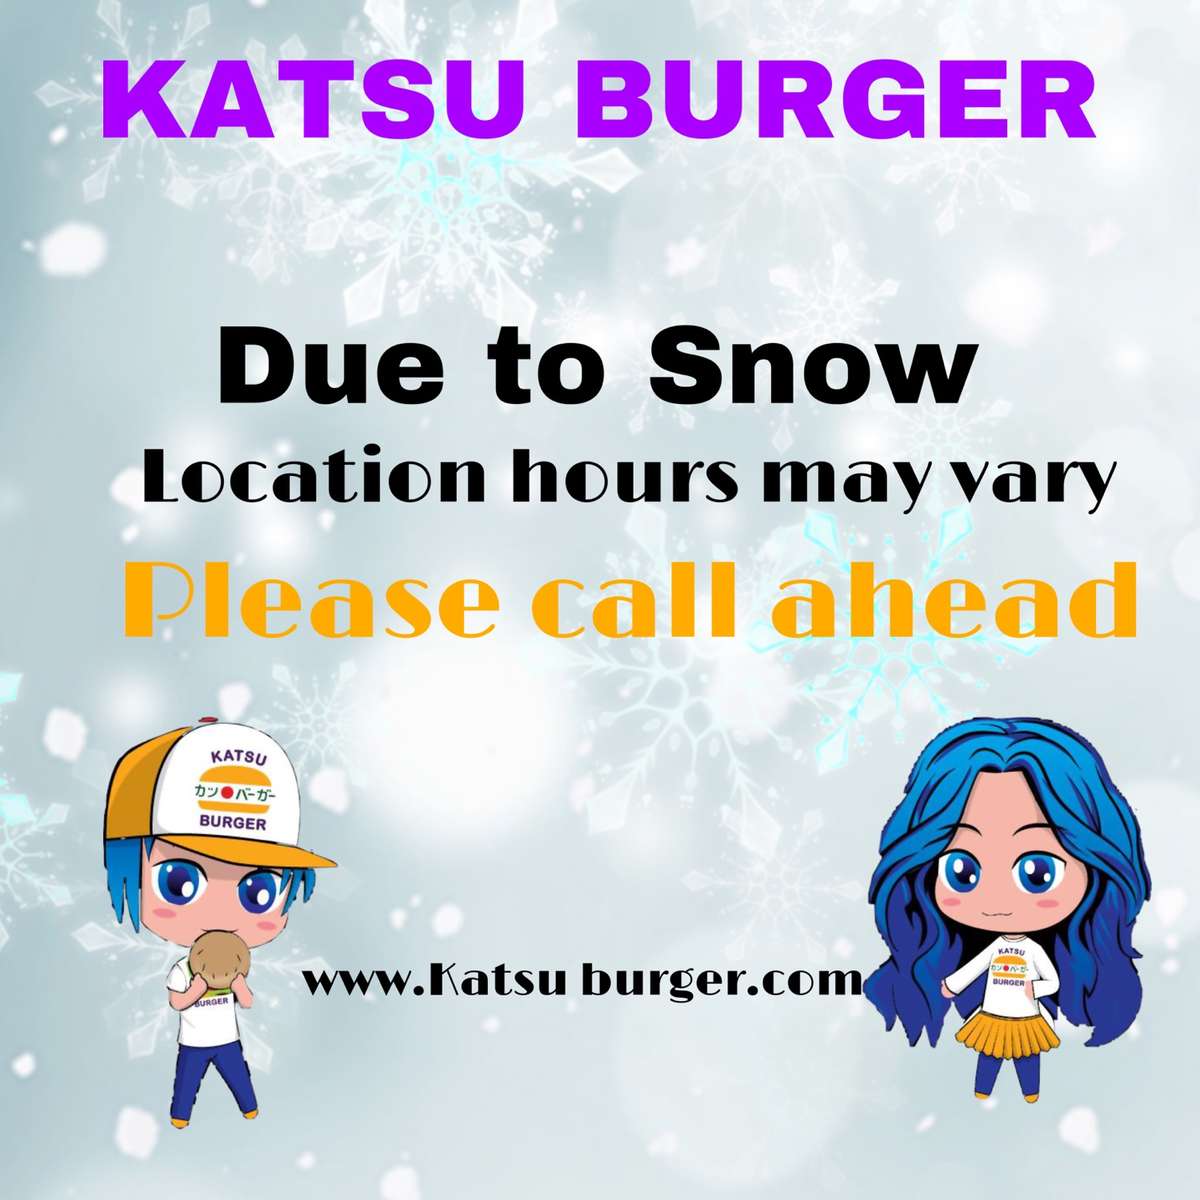 katsu burger due to snow location hours may vary please call ahead